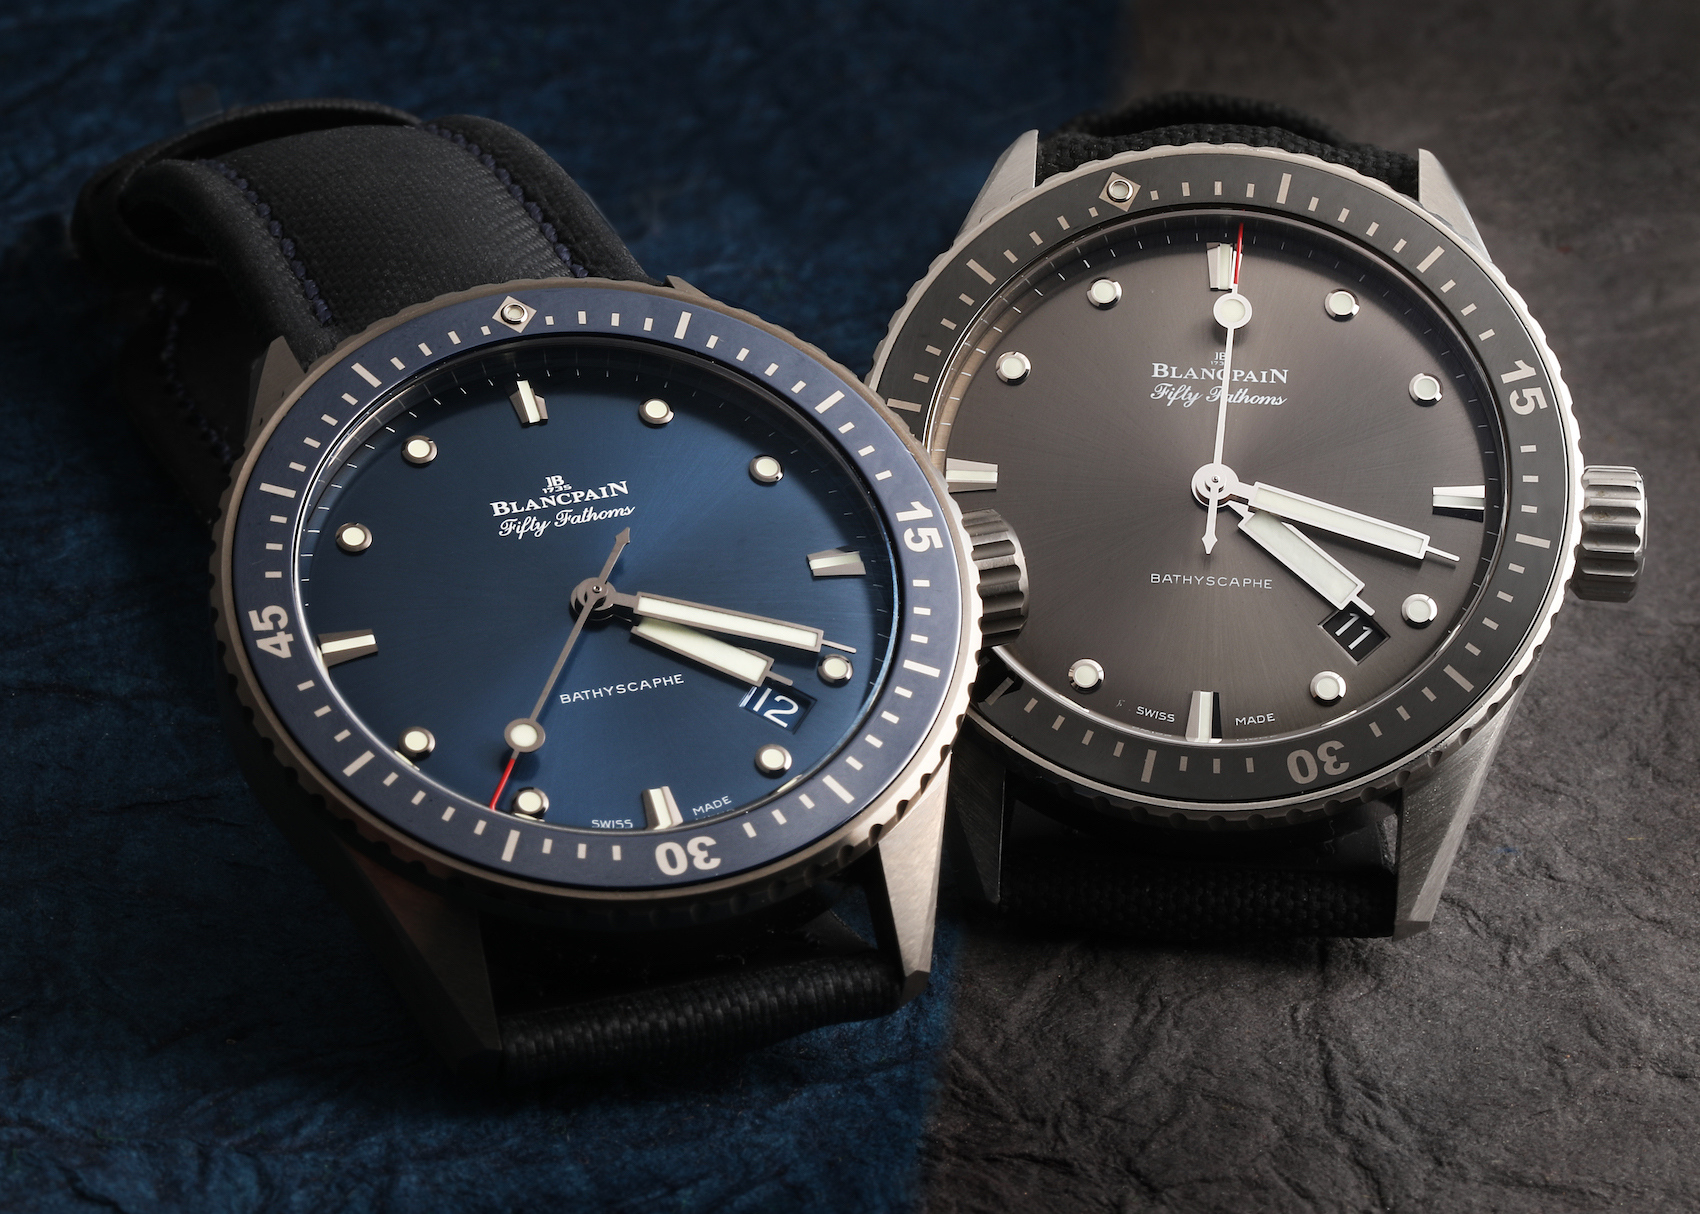 Blancpain Fifty Fathoms Black and Blue Dial Watches 5000